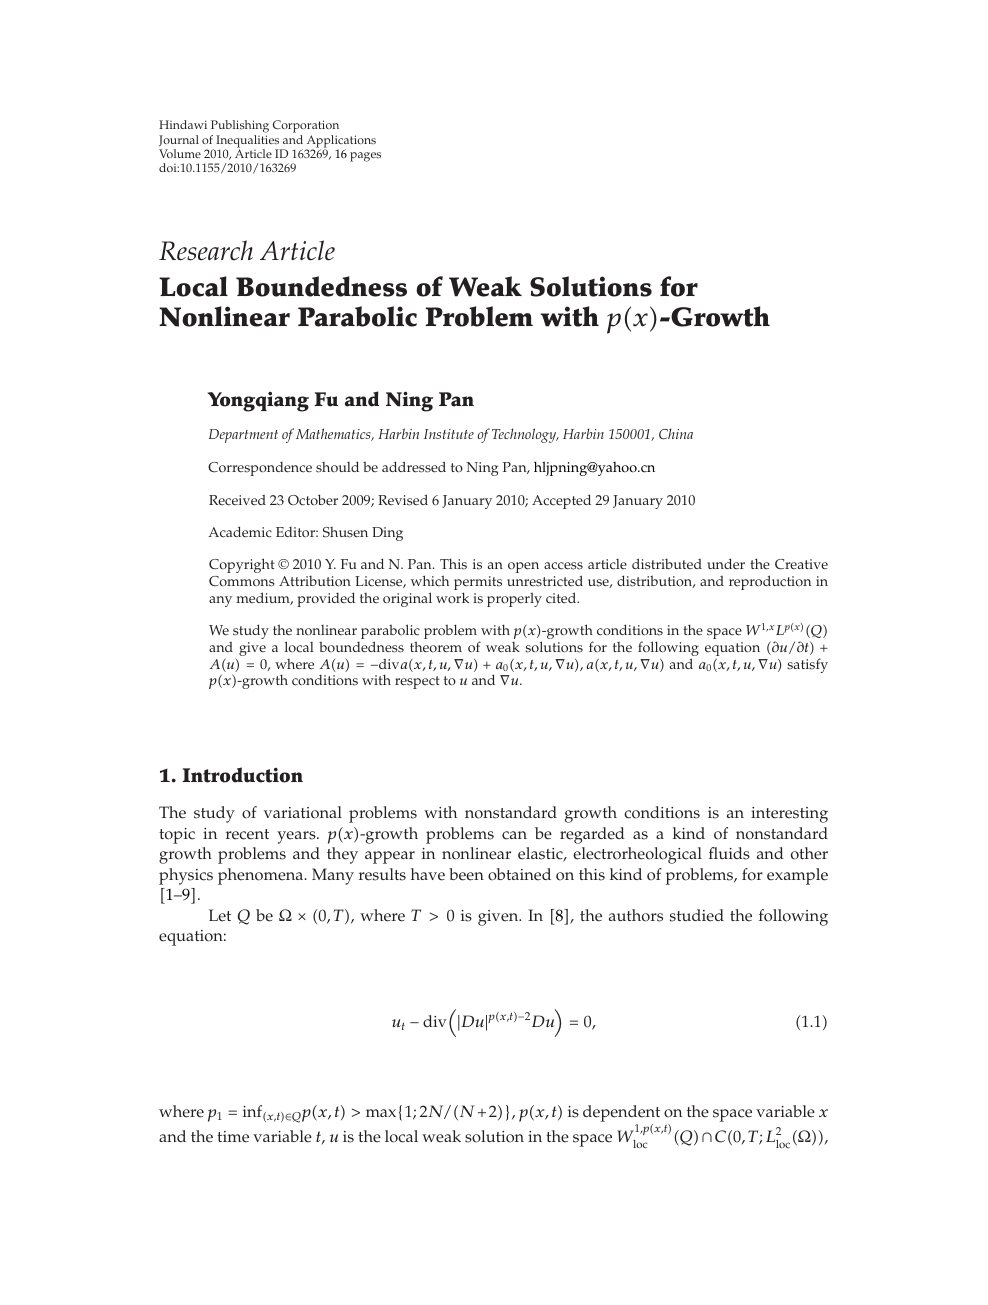 Local Boundedness Of Weak Solutions For Nonlinear Parabolic Problem With P X Growth Topic Of Research Paper In Mathematics Download Scholarly Article Pdf And Read For Free On Cyberleninka Open Science Hub